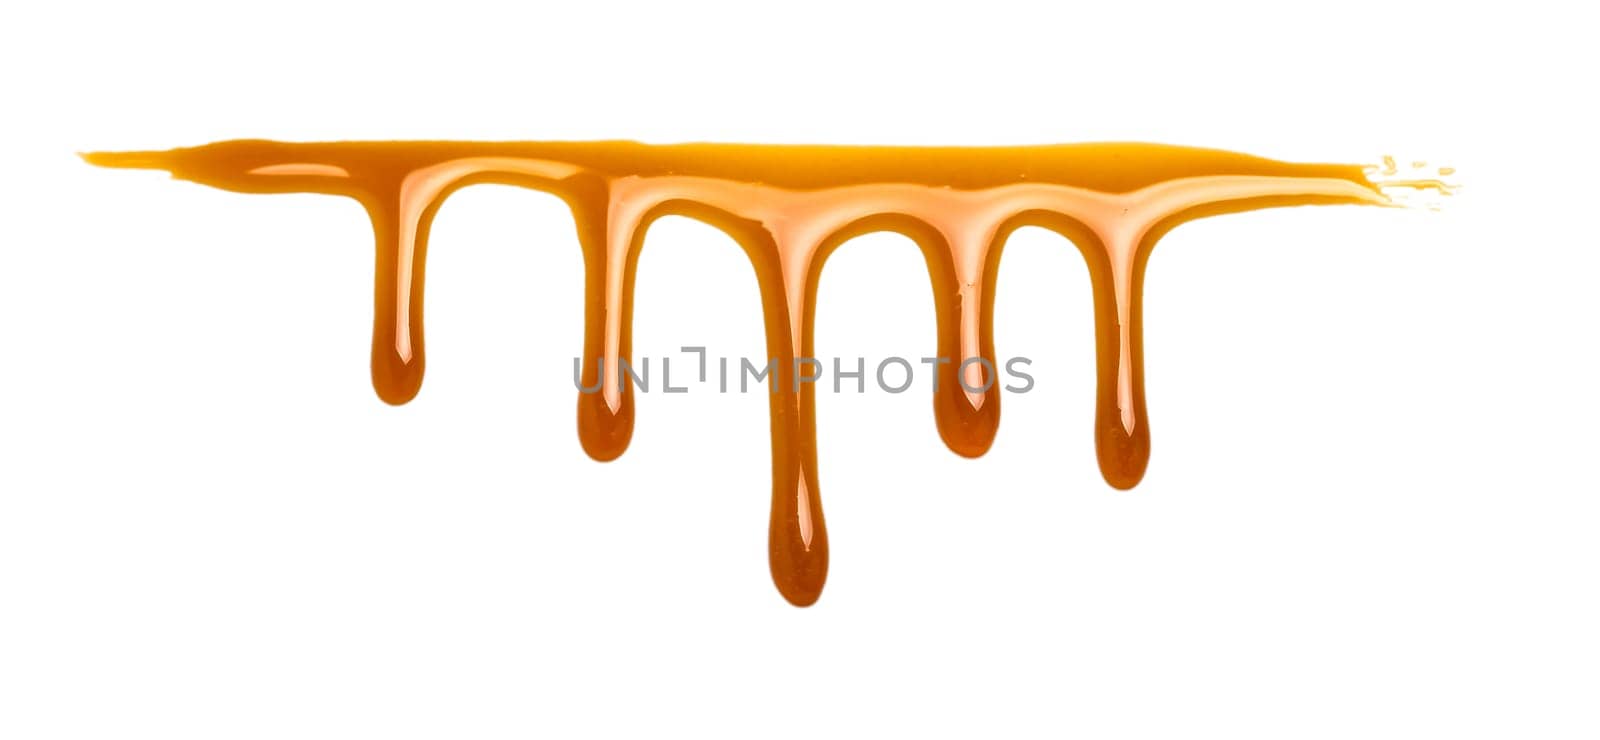 sweet caramel sauce isolated on white by fascinadora